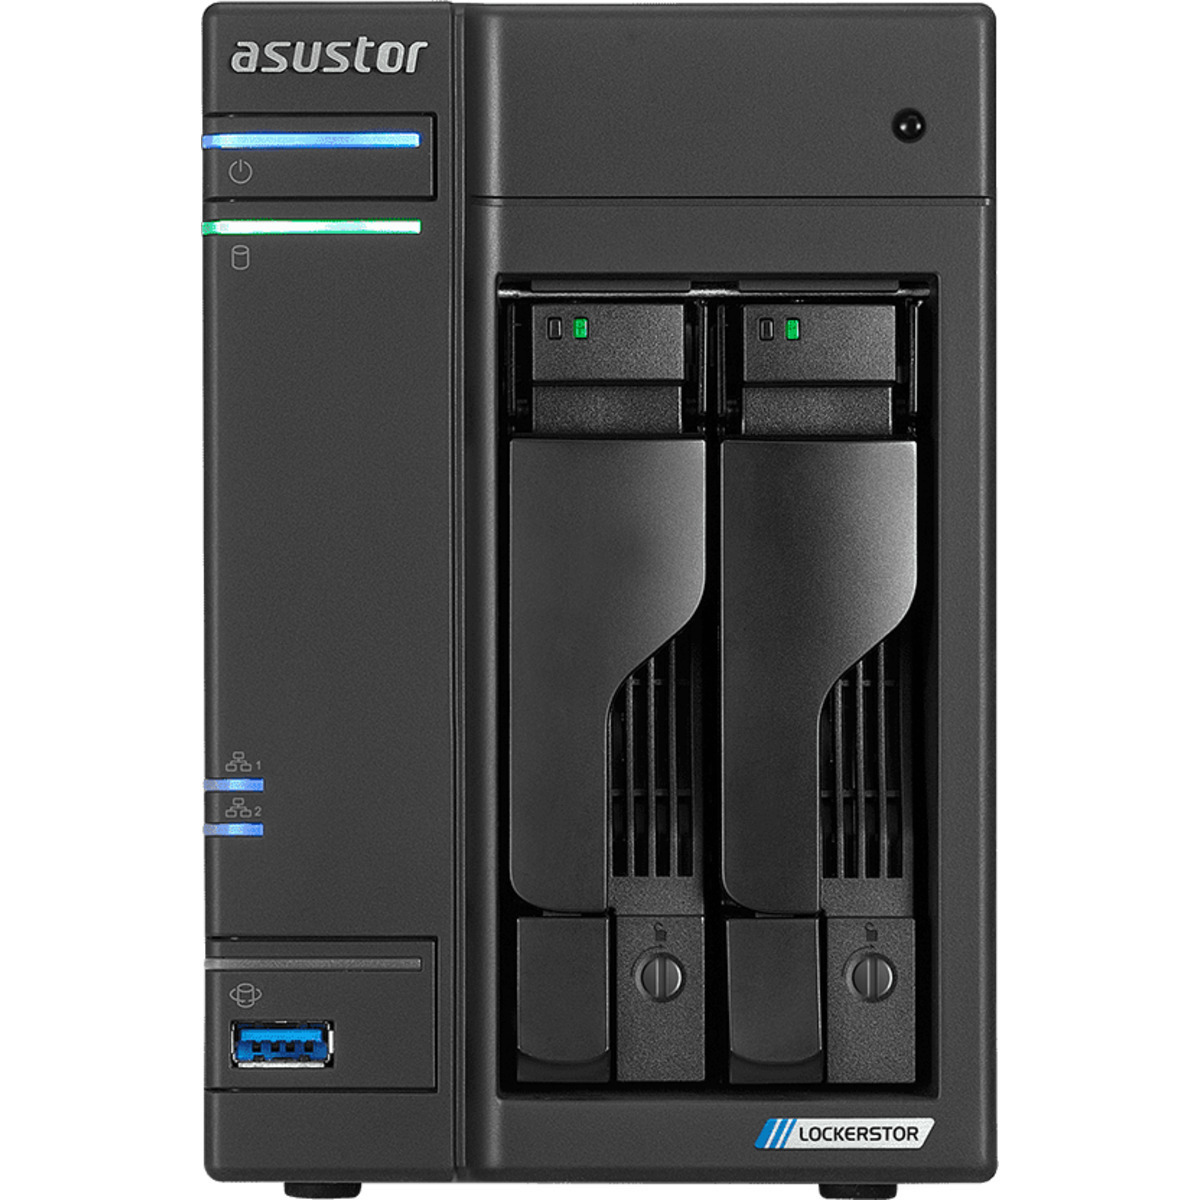 buy $777 ASUSTOR AS6602T Lockerstor 2 2tb Desktop NAS - Network Attached Storage Device 2x1000gb Samsung 870 QVO MZ-77Q1T0 2.5 SATA 6Gb/s SSD CONSUMER Class Drives Installed - Burn-In Tested - FREE RAM UPGRADE - nas headquarters buy network attached storage server device das new raid-5 free shipping usa christmas new year holiday sale AS6602T Lockerstor 2